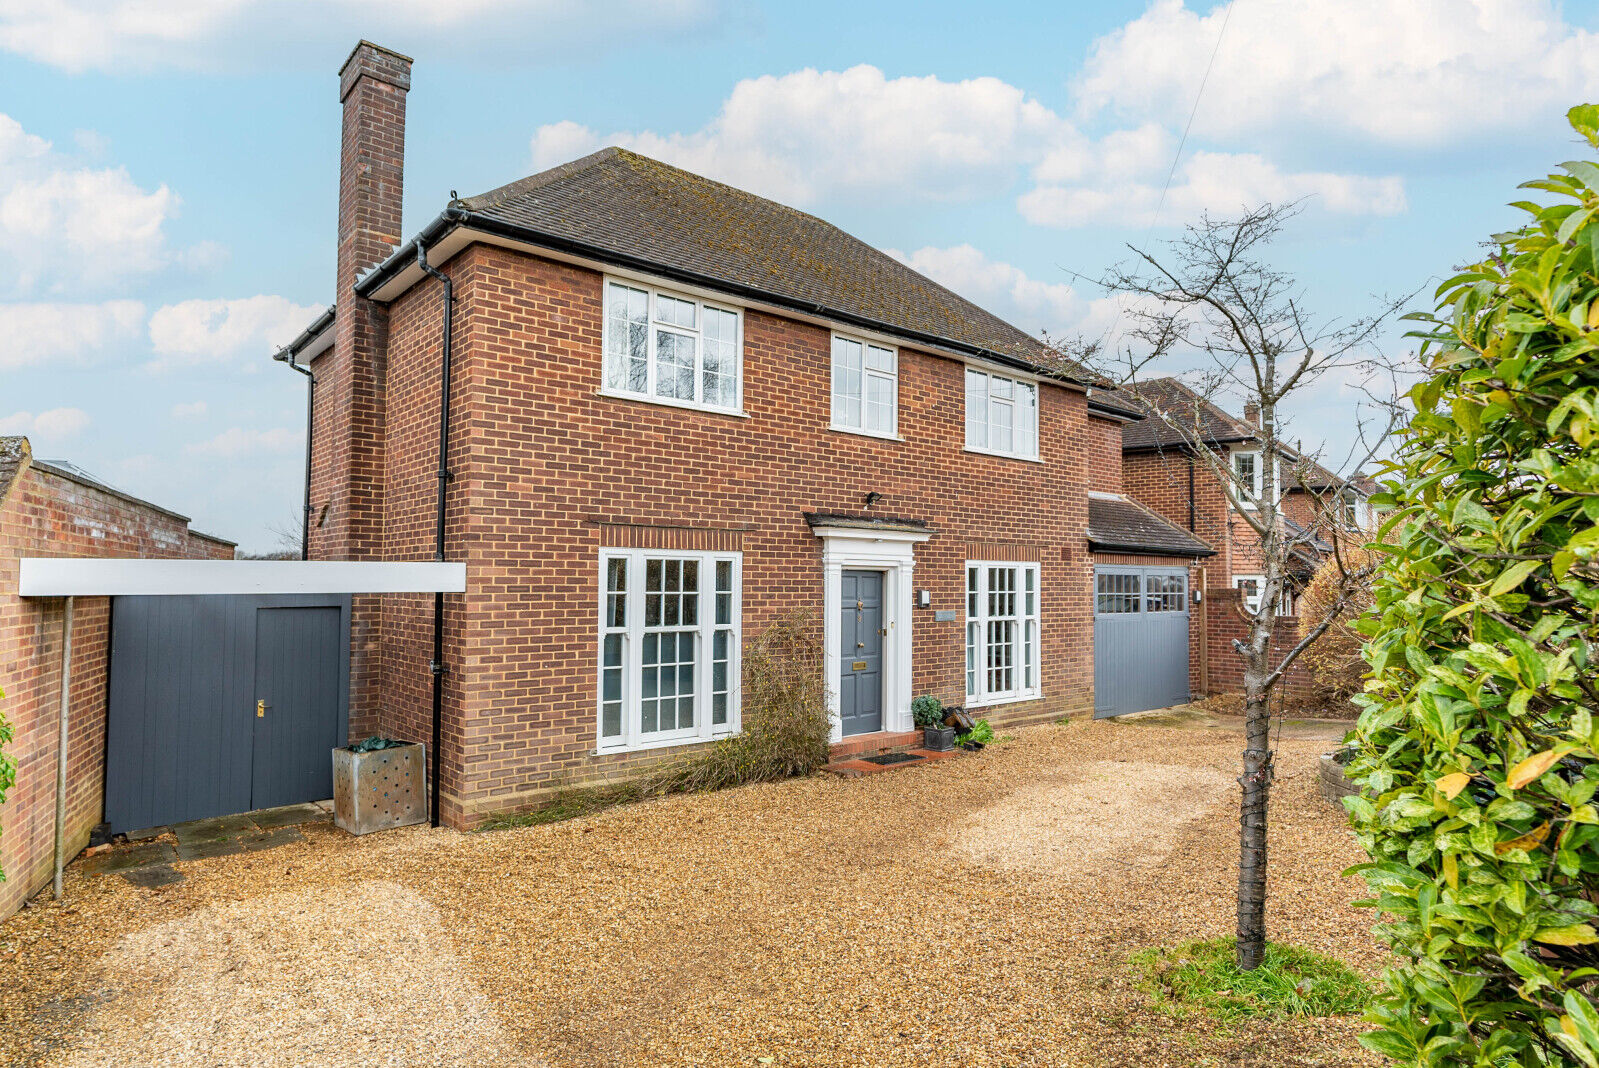 5 bedroom detached house to rent, Available now Westfields, St. Albans, AL3, main image